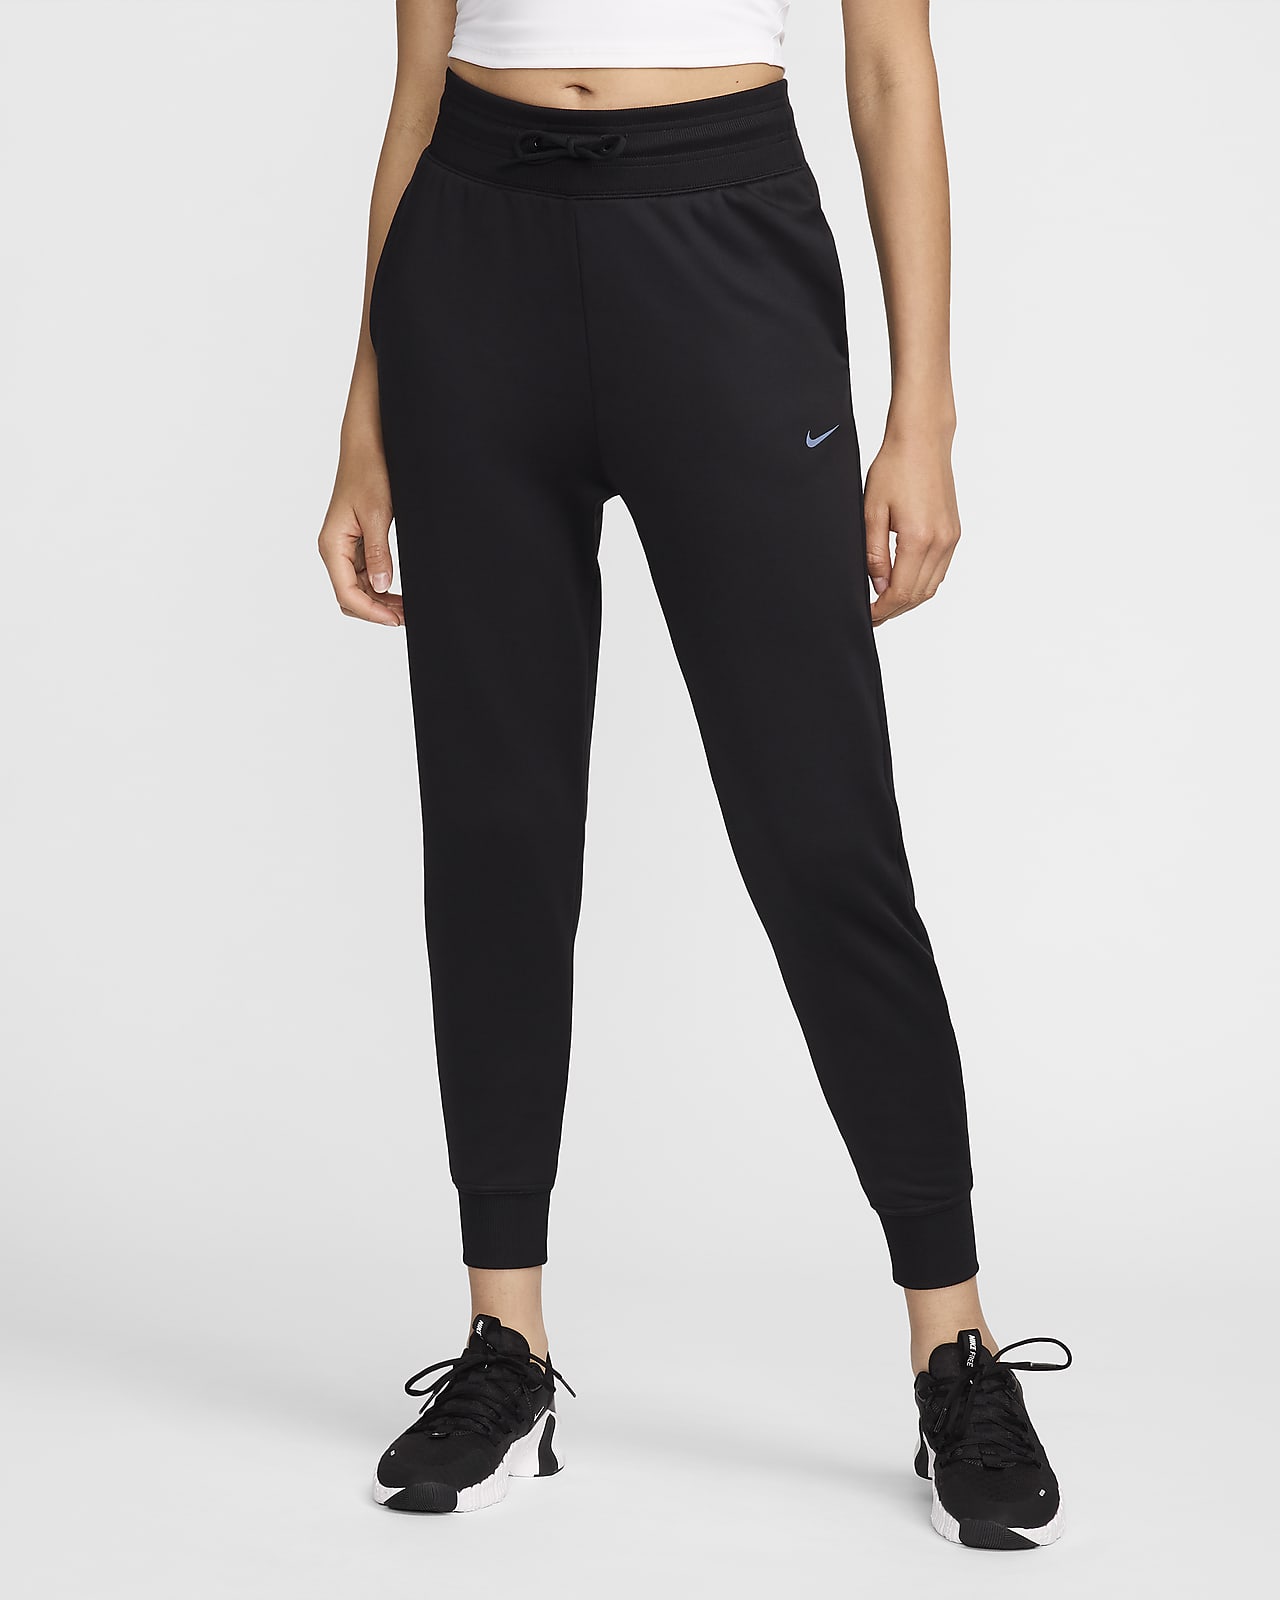 Women's Nike Pro Training & Gym Trousers & Tights. Nike IN